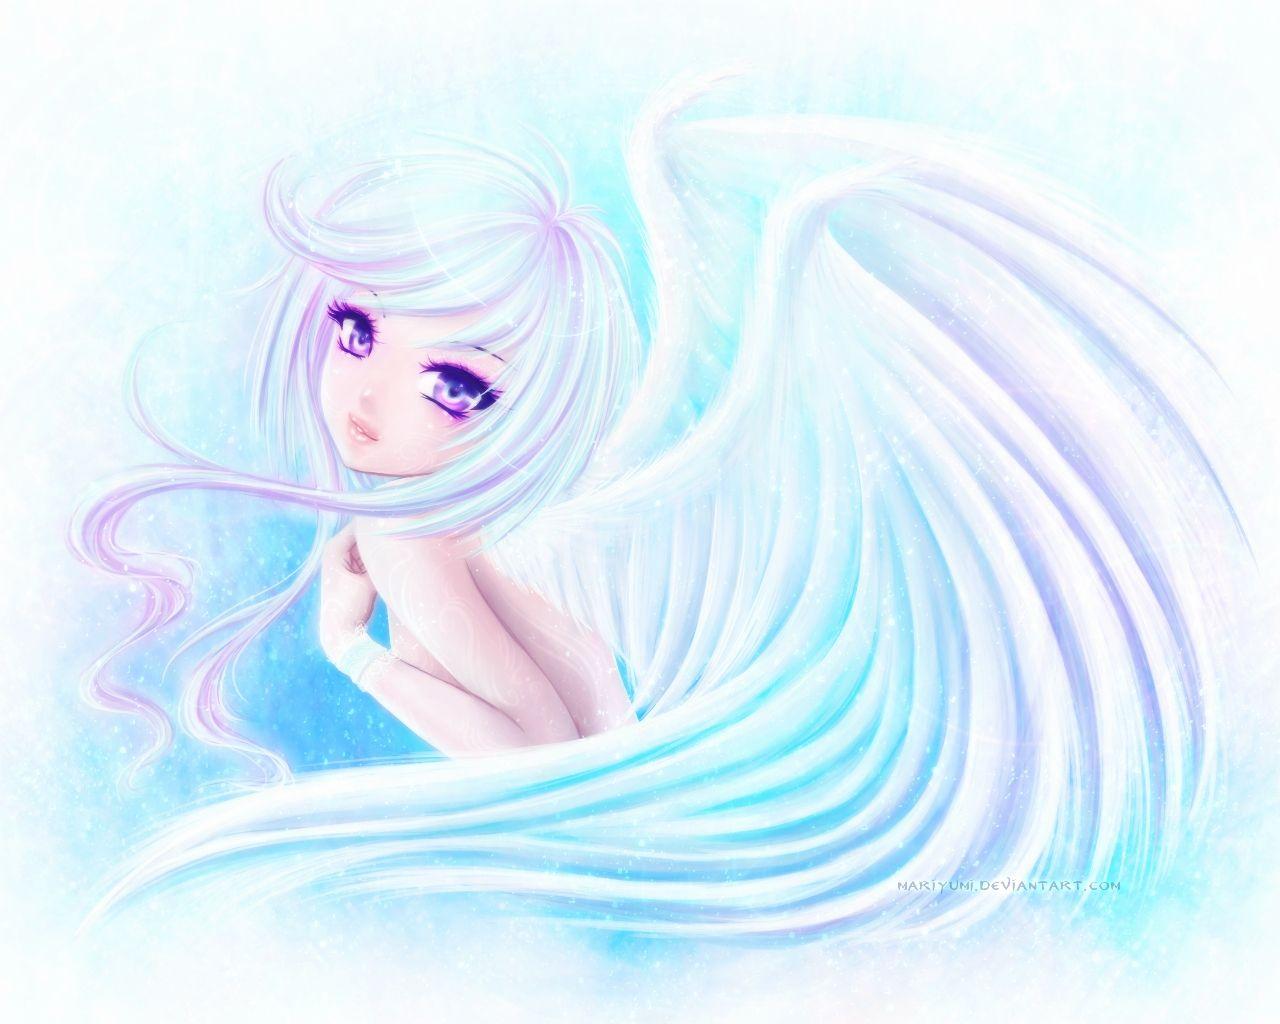 Anime angel wallpaper. See To World